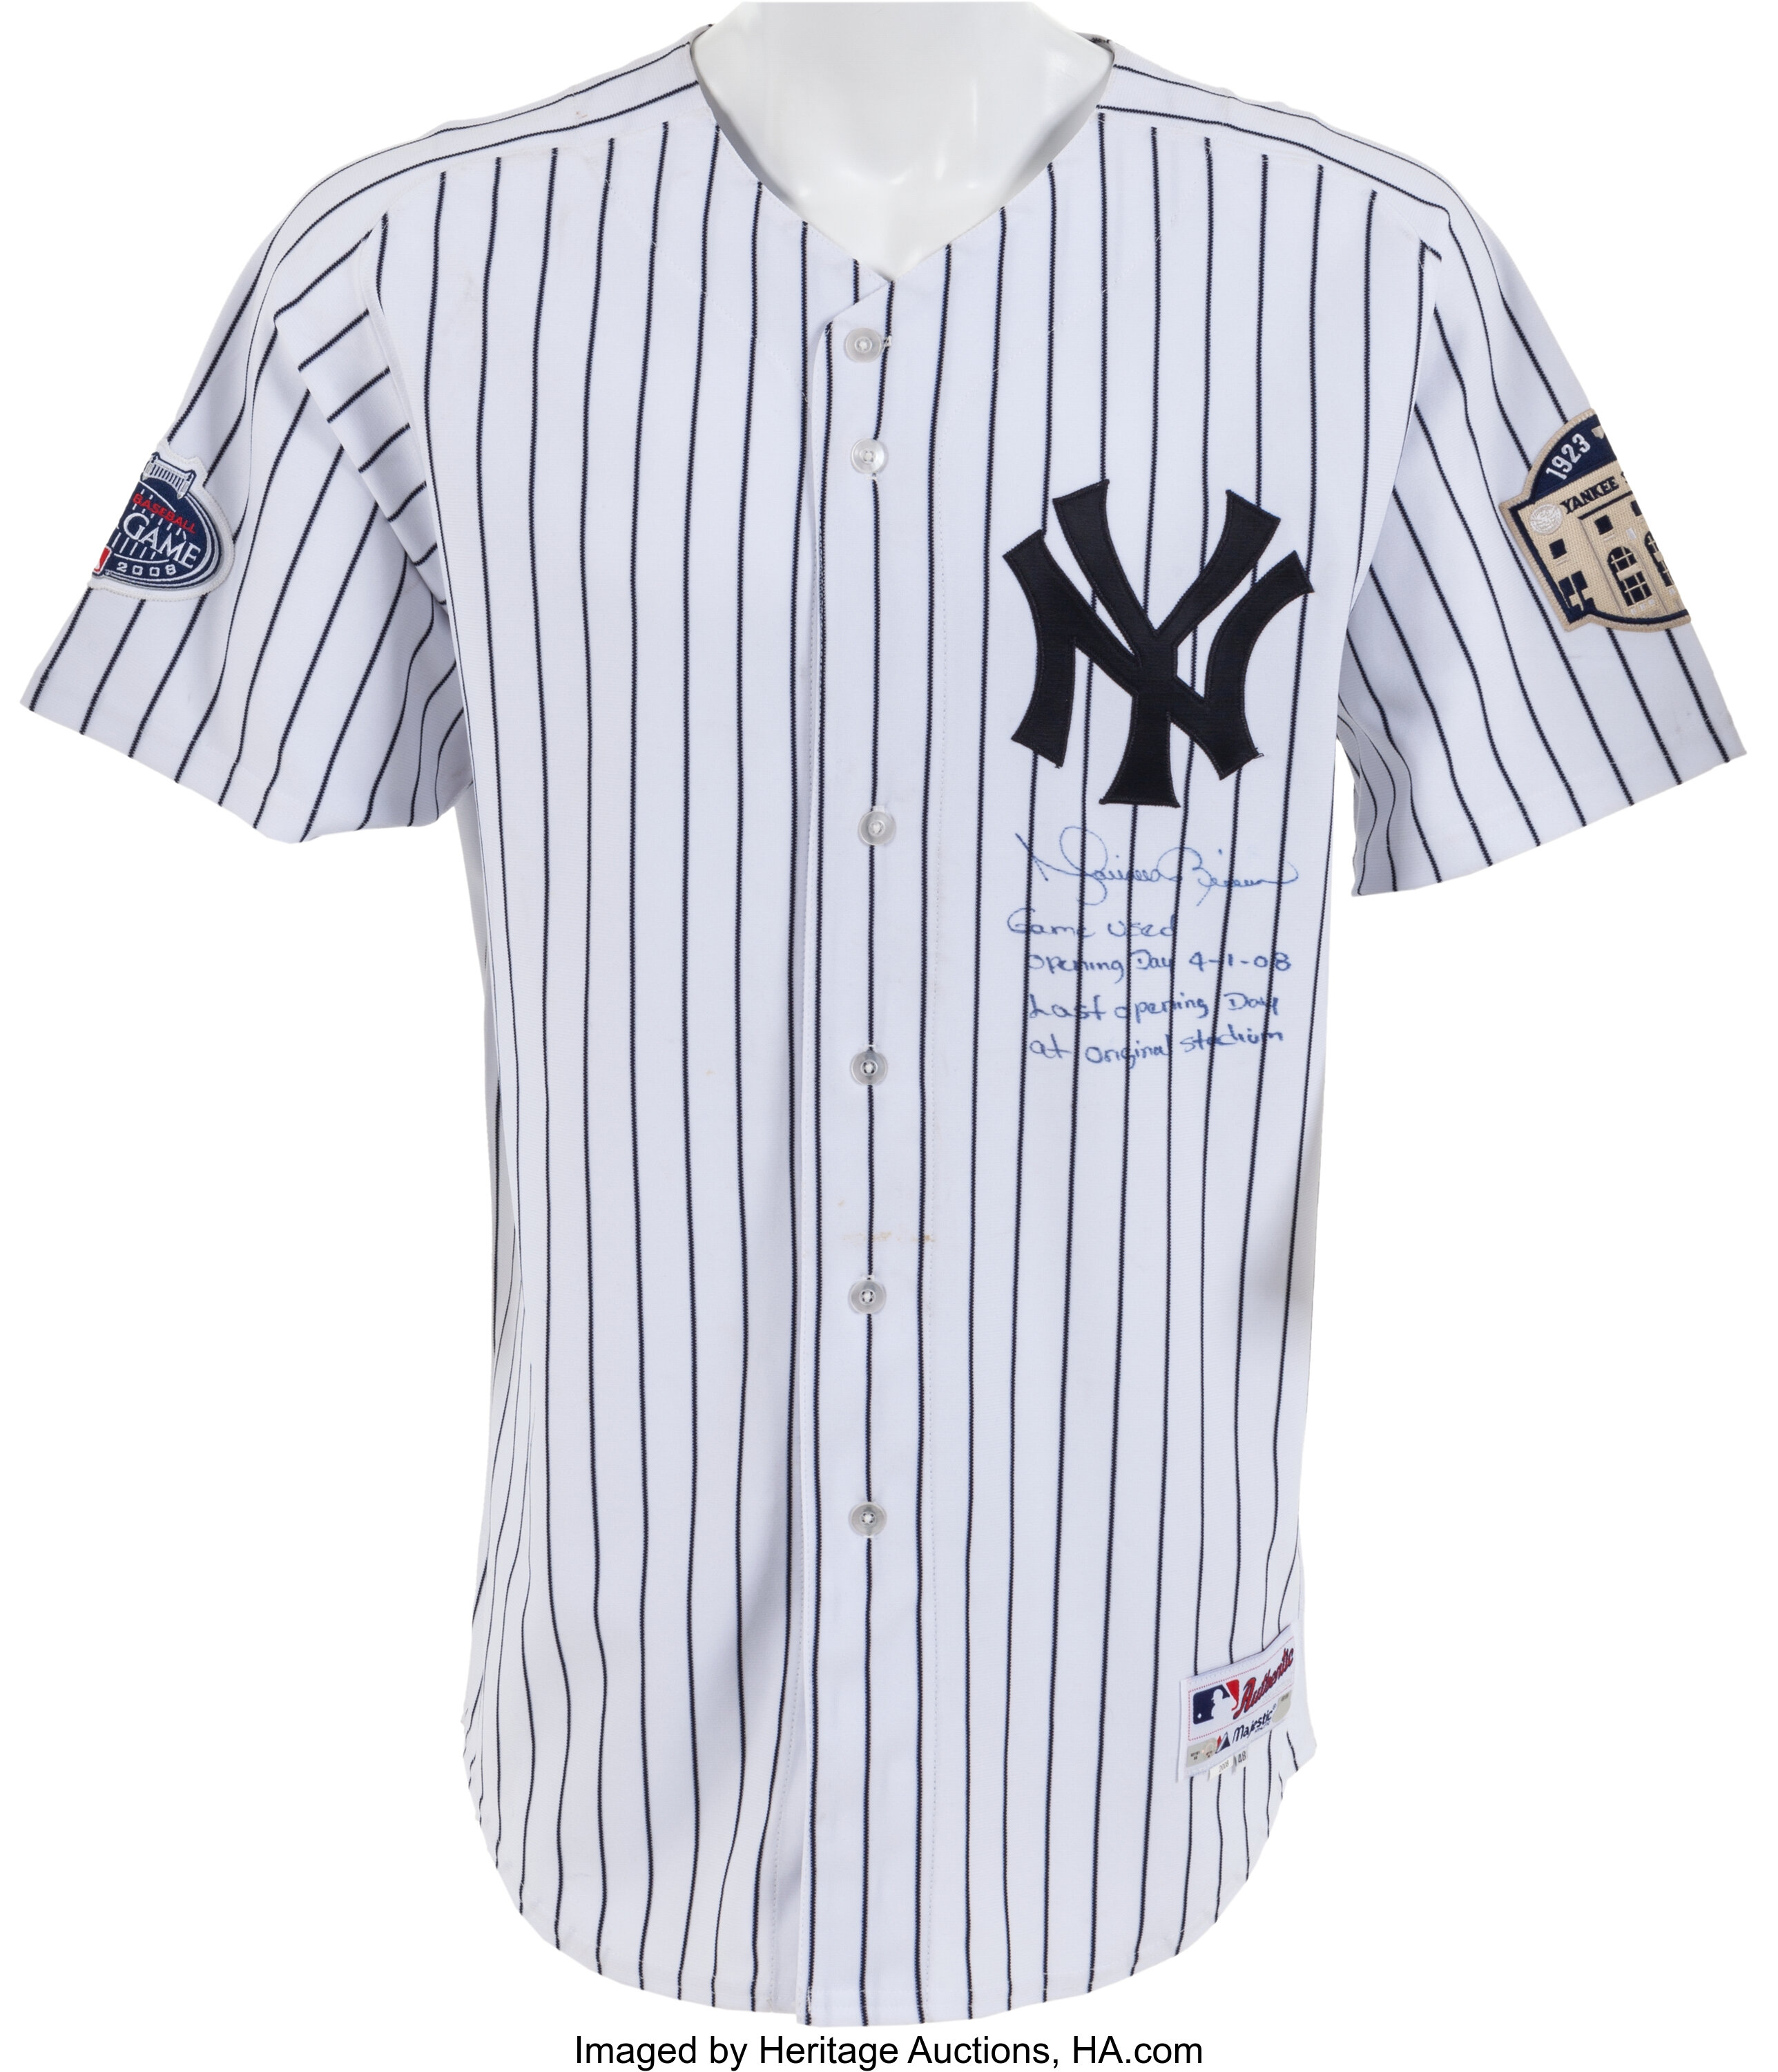 Mariano Rivera Authentic NY Yankees Jersey. Authentic Majestic